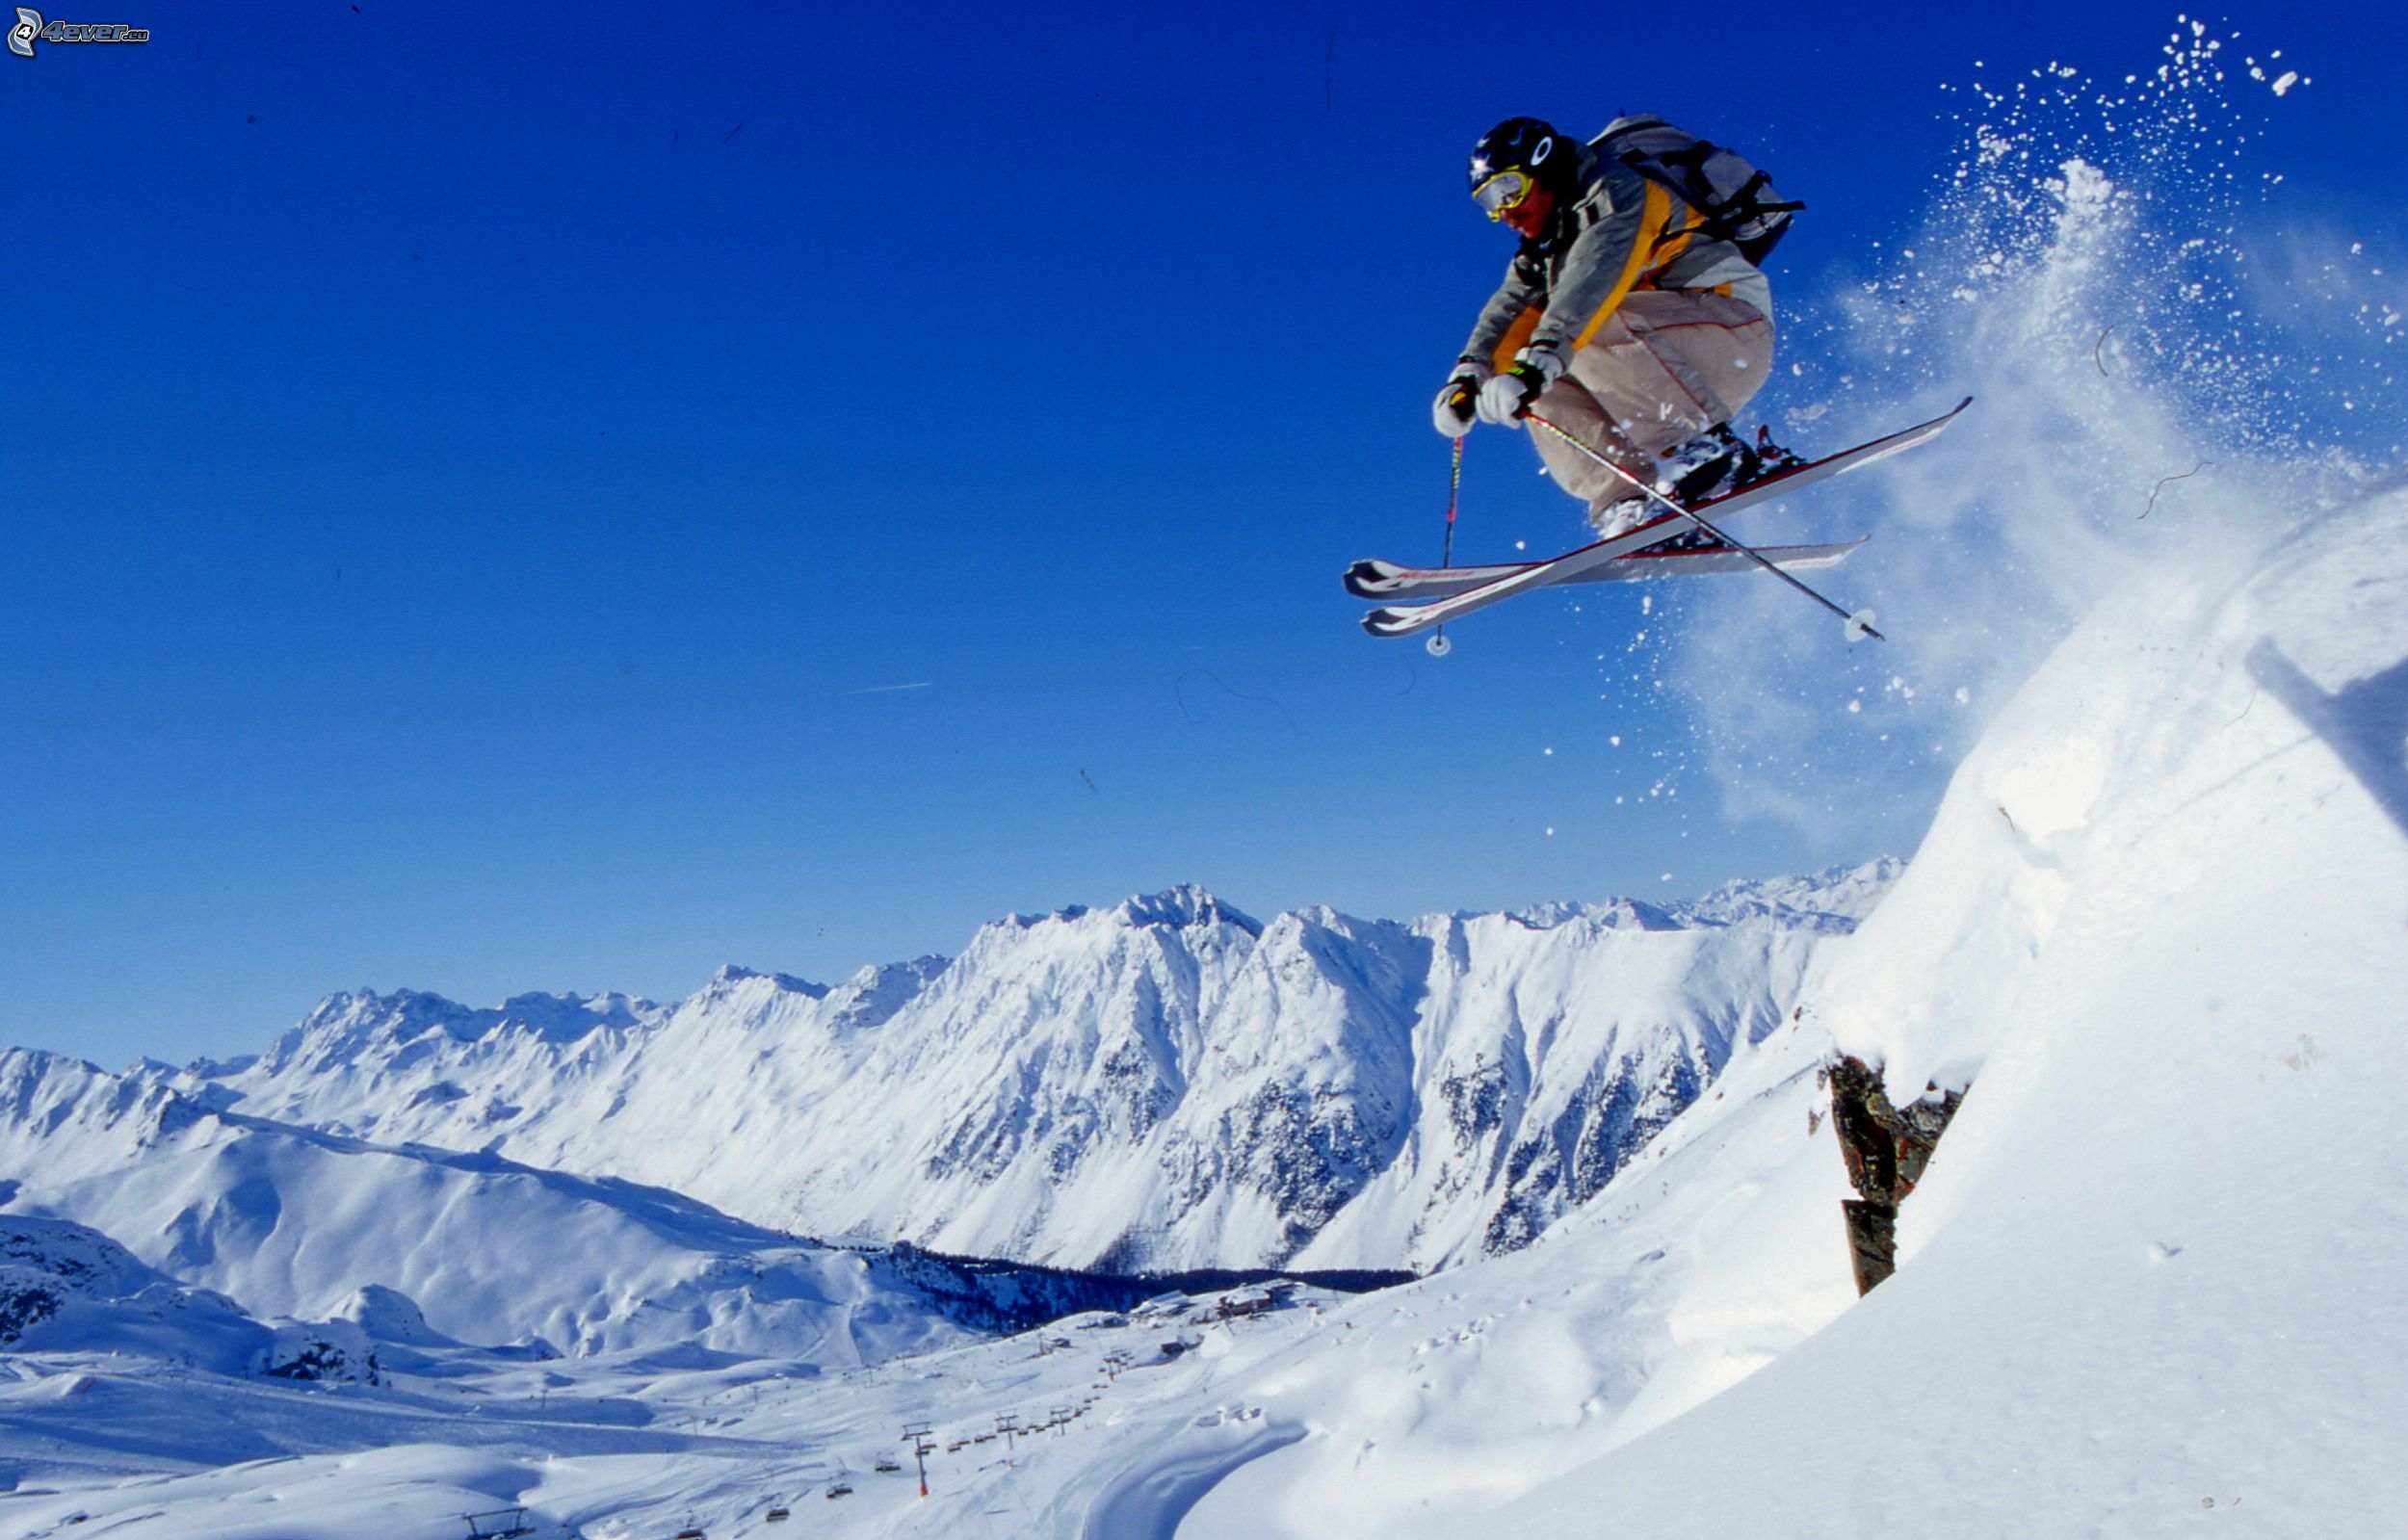 http://pictures.4ever.eu/data/download/sport/winter-sports/extreme-skiing,-jump,-snowy-mountains-219692.jpg?no-logo